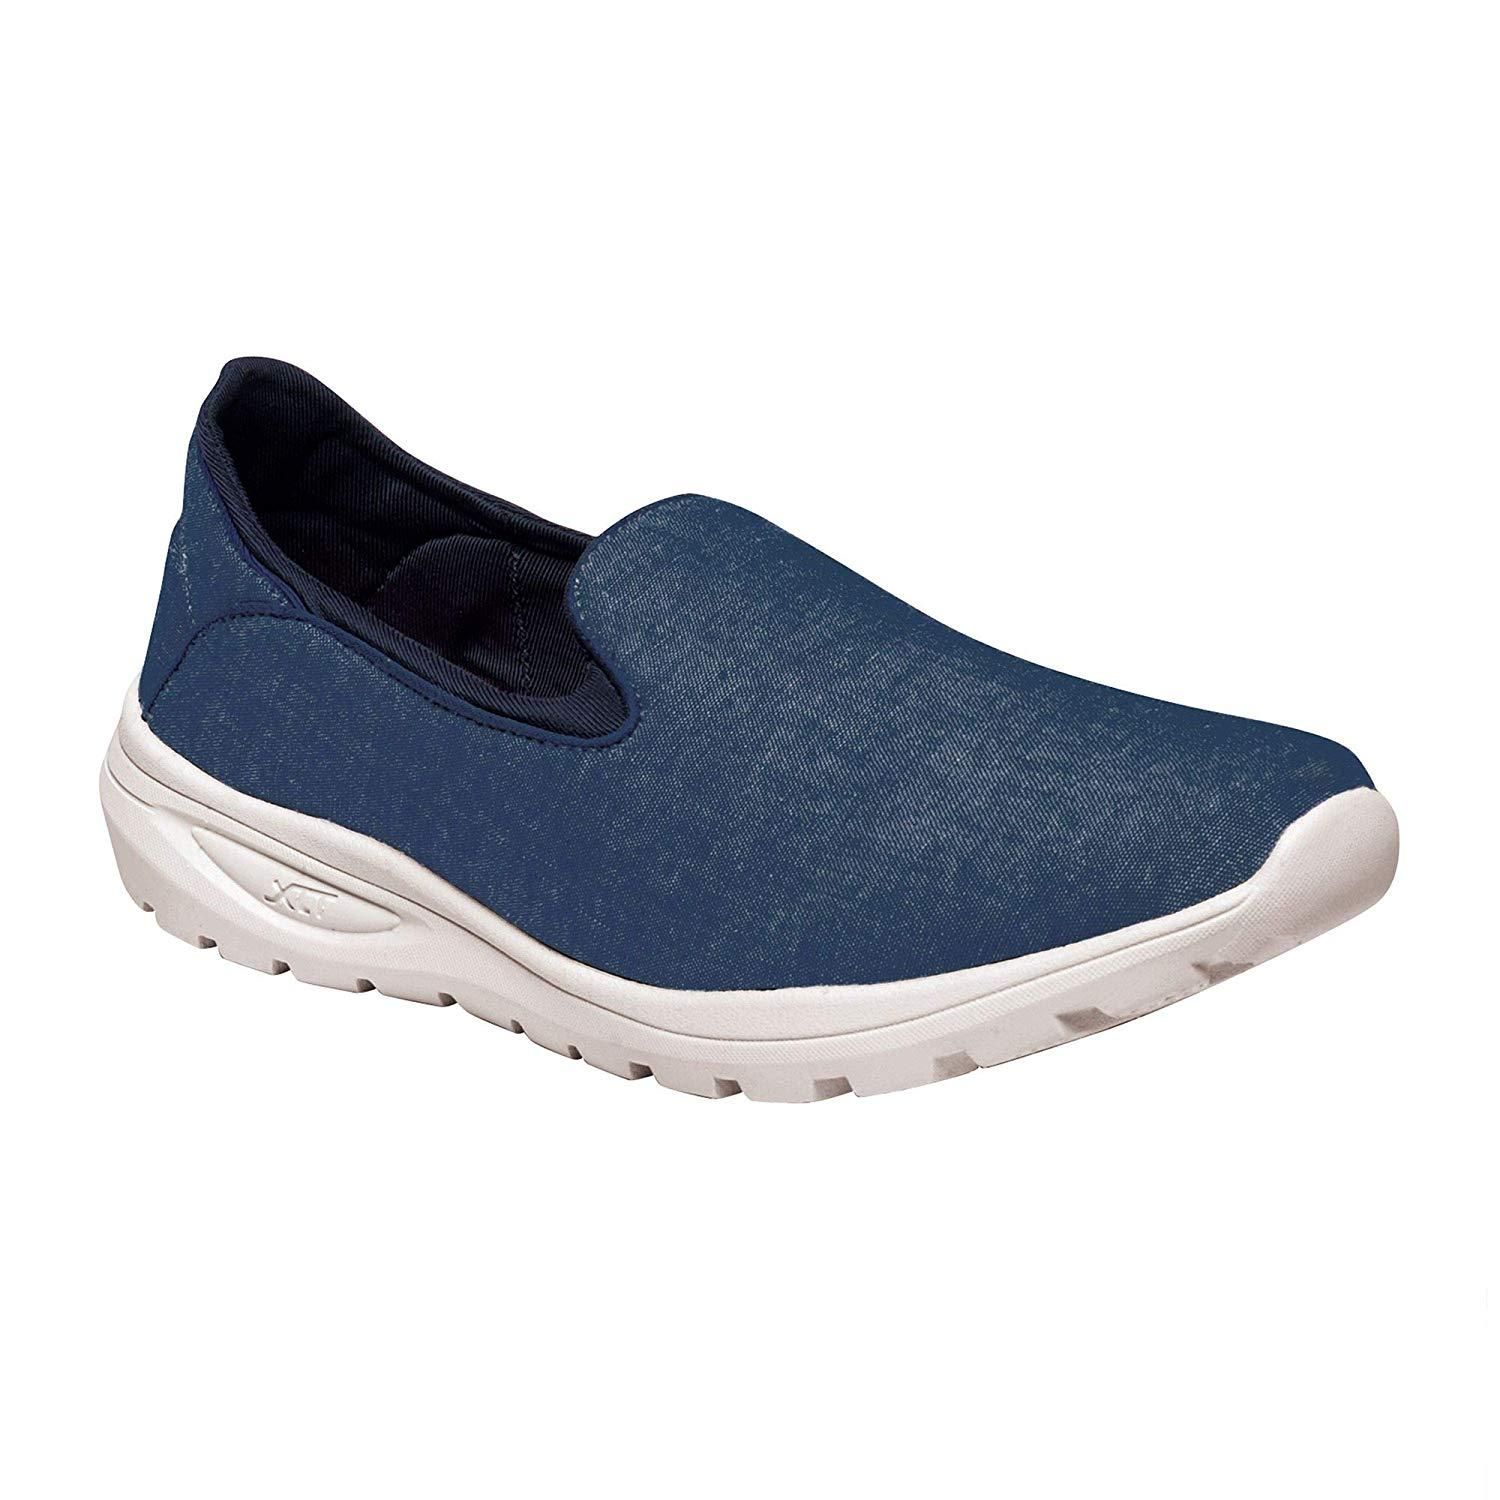 100% polyester. Slip on mesh upper for breathable comfort and easy on/off. Deep padded collar and tongue for all day comfort. Die cut EVA footbed for underfoot comfort and support. New XLT sole unit provides flexible and lightweight underfoot comfort.